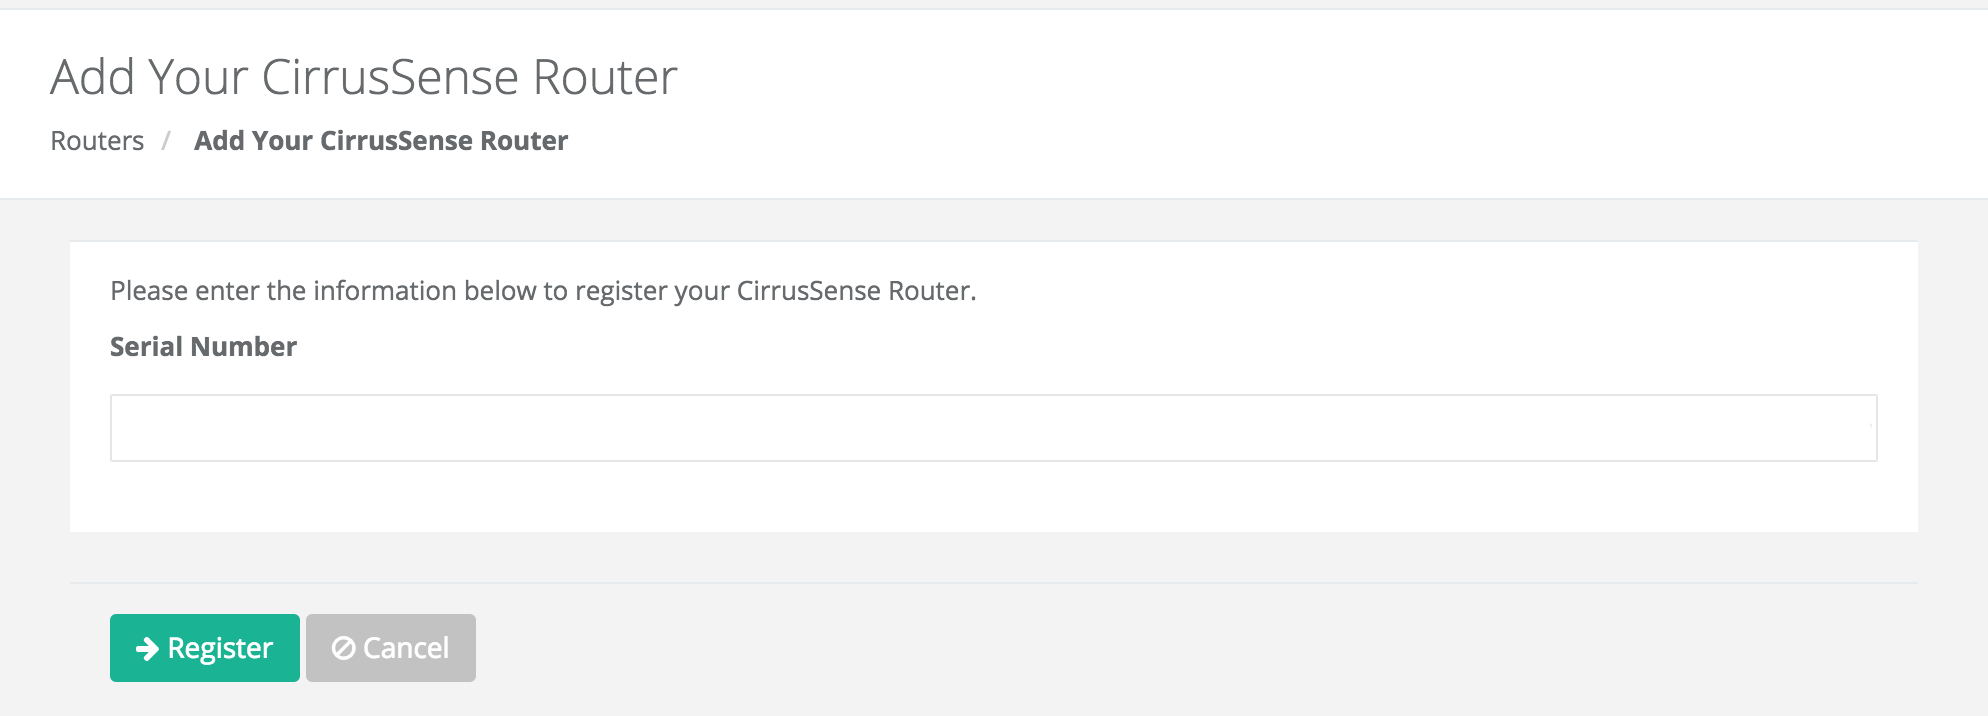 Add Router Form